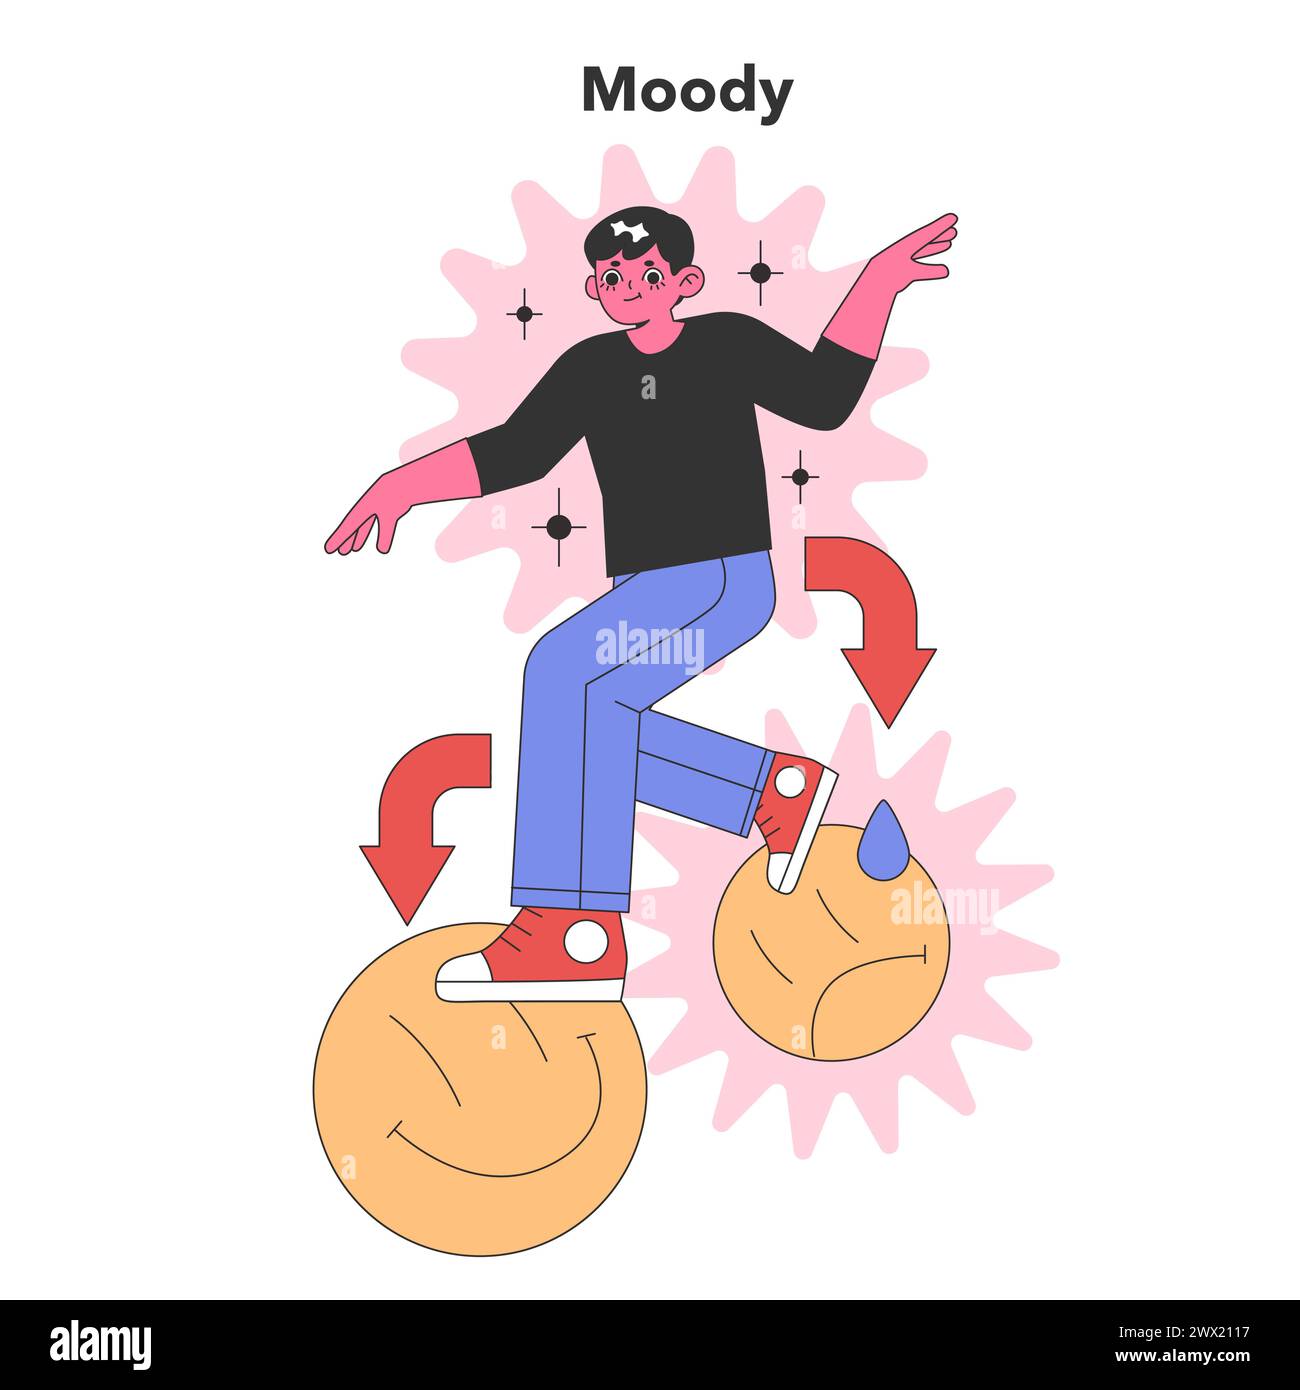 Moody Personality trait. A dynamic character balancing on mood spheres, representing emotional instability and temperament shifts. Flat vector illustration Stock Vector